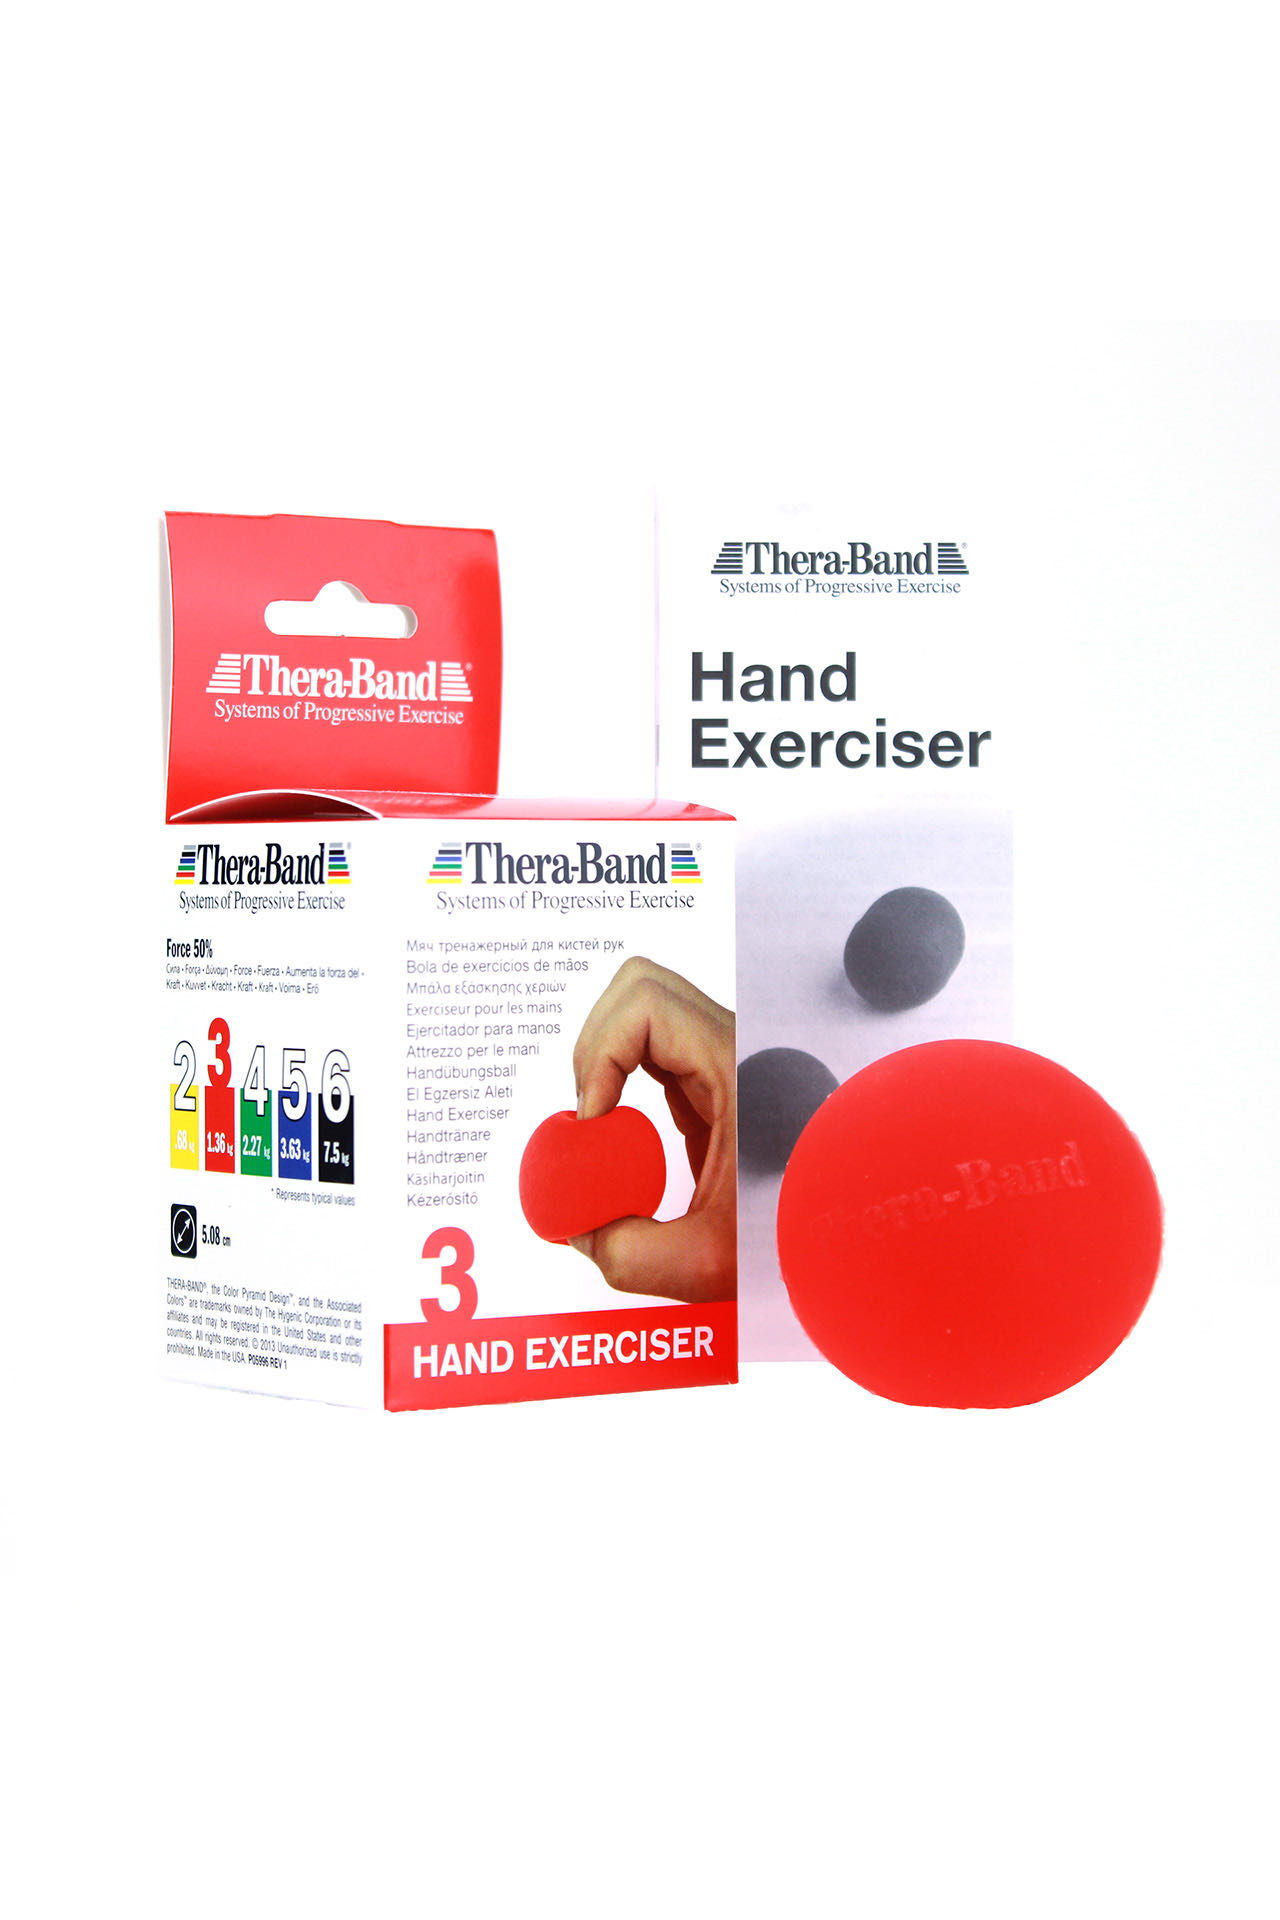 hand excersiser thera band red fengbao kung fu finger trainer shop wien 1080